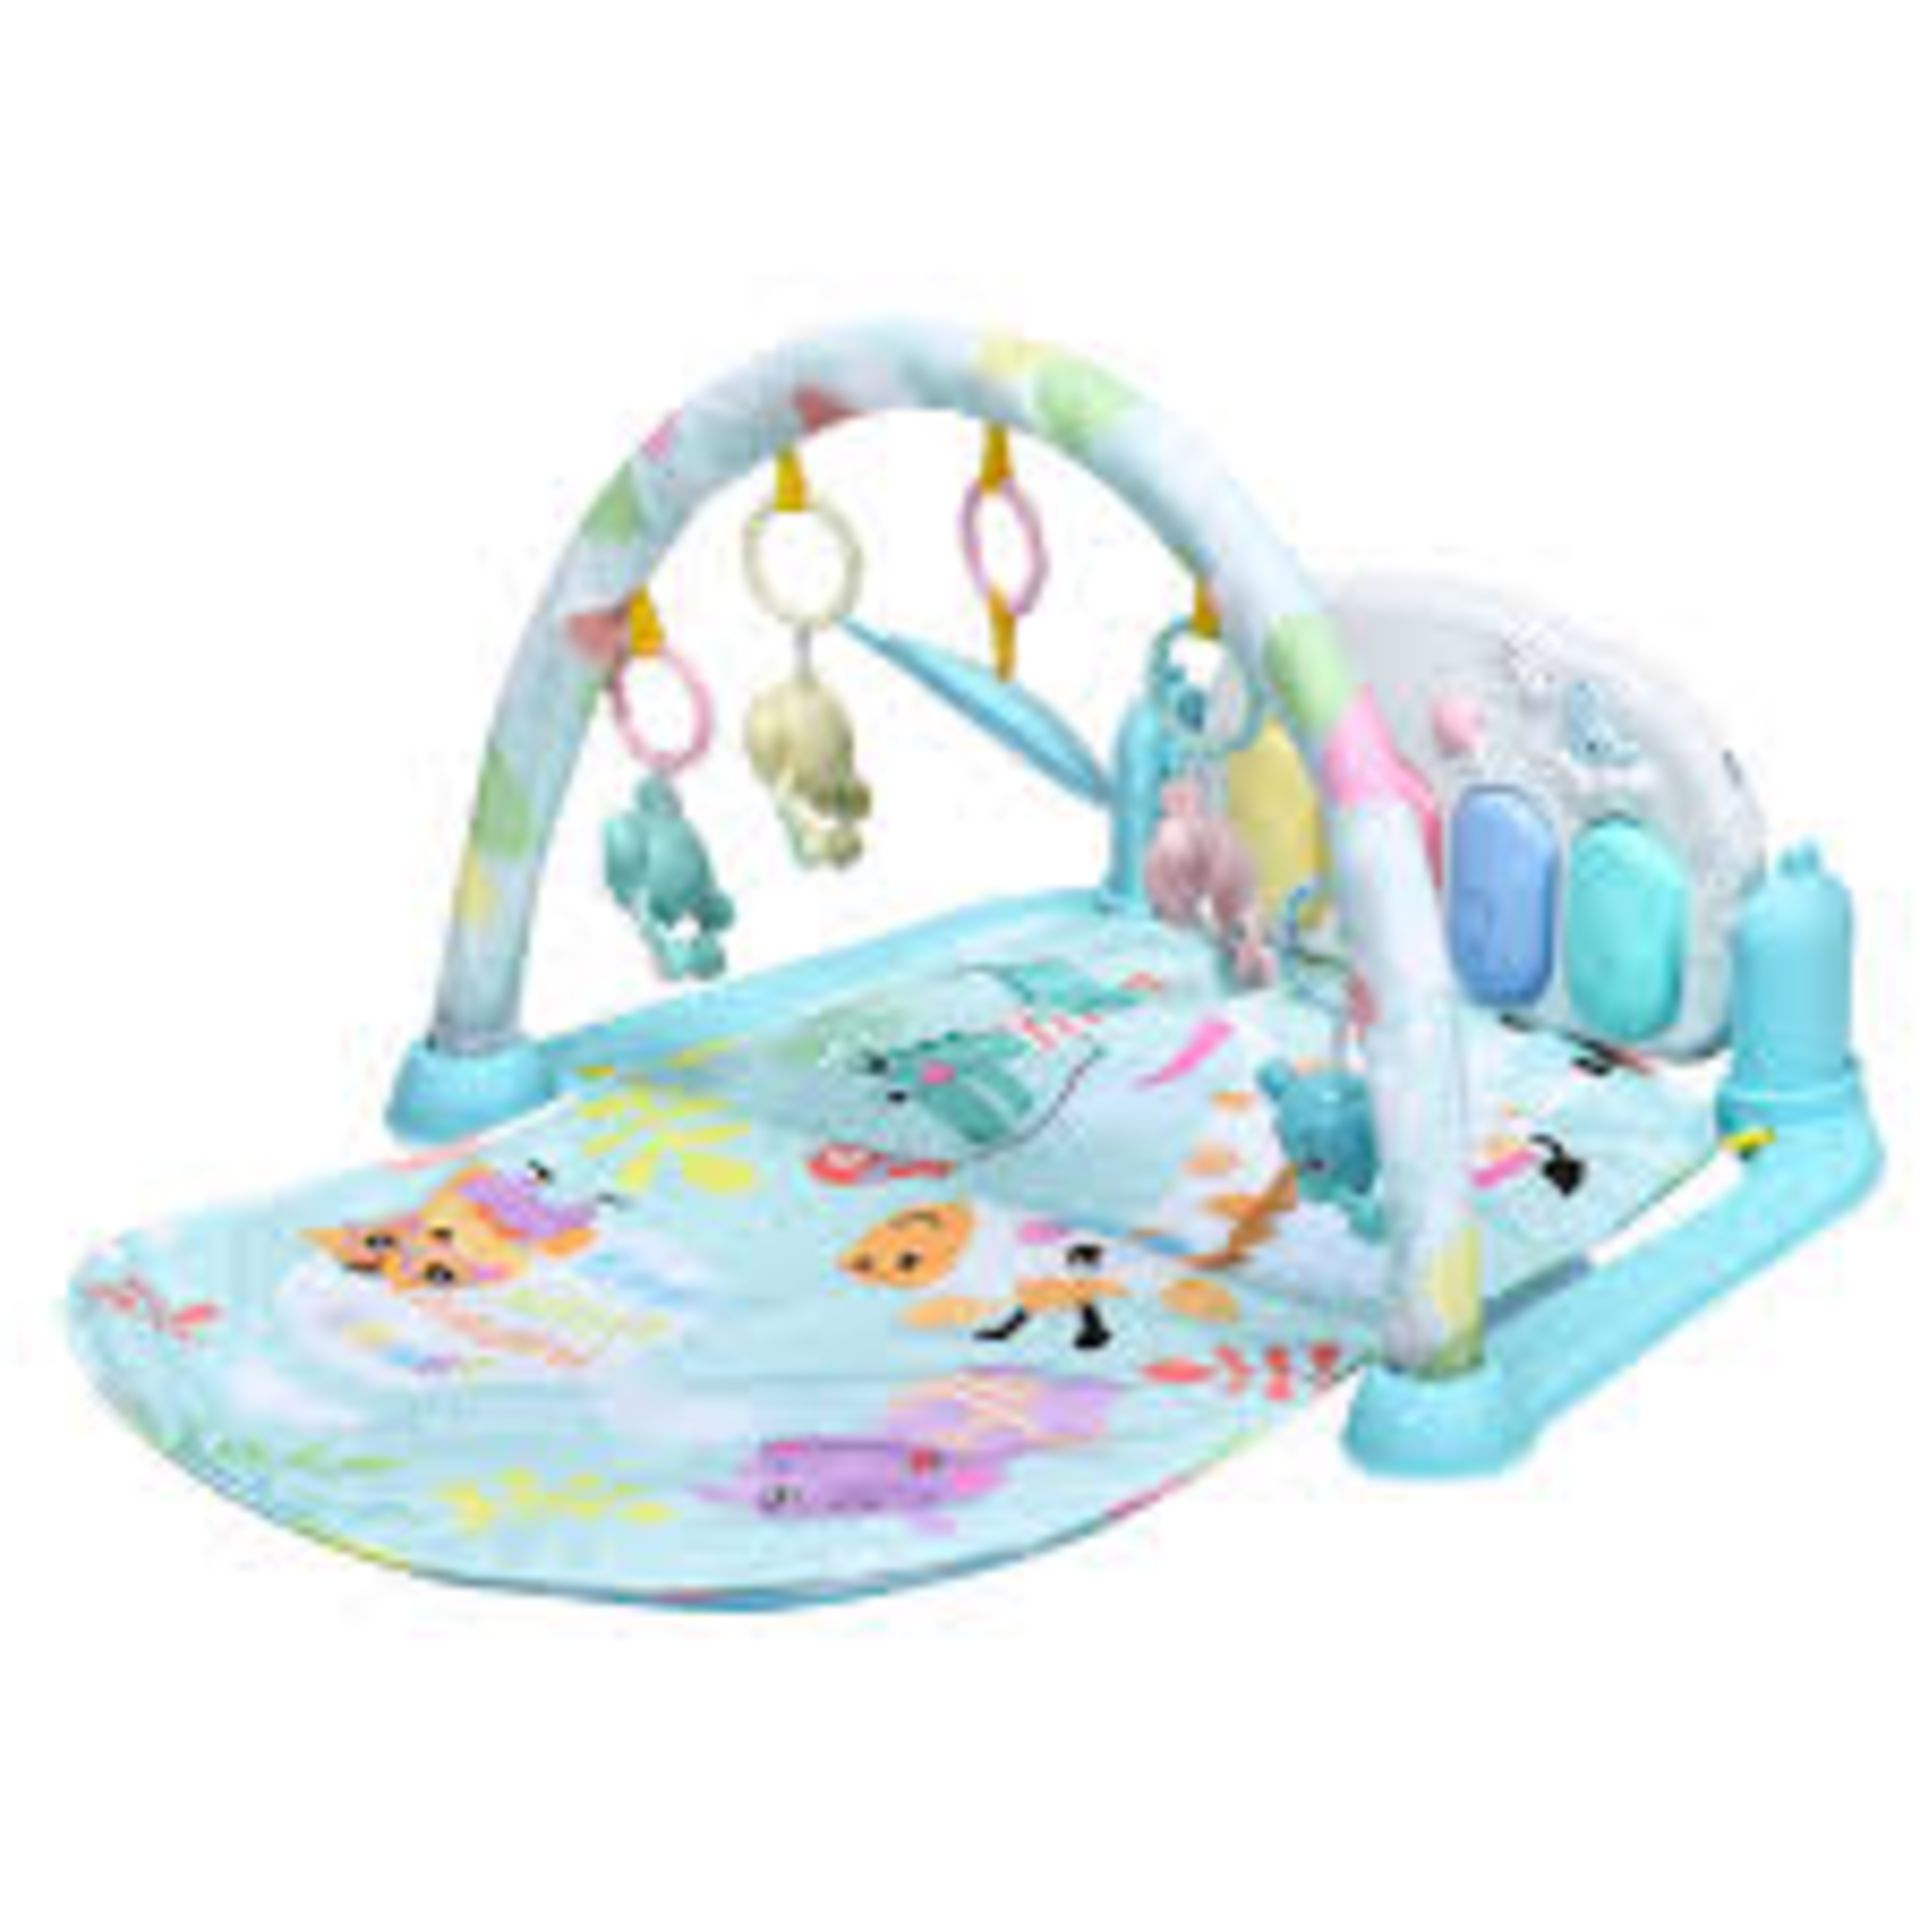 Baby Play Mat with Lights and Music for Newborn-Blue. R14.12.